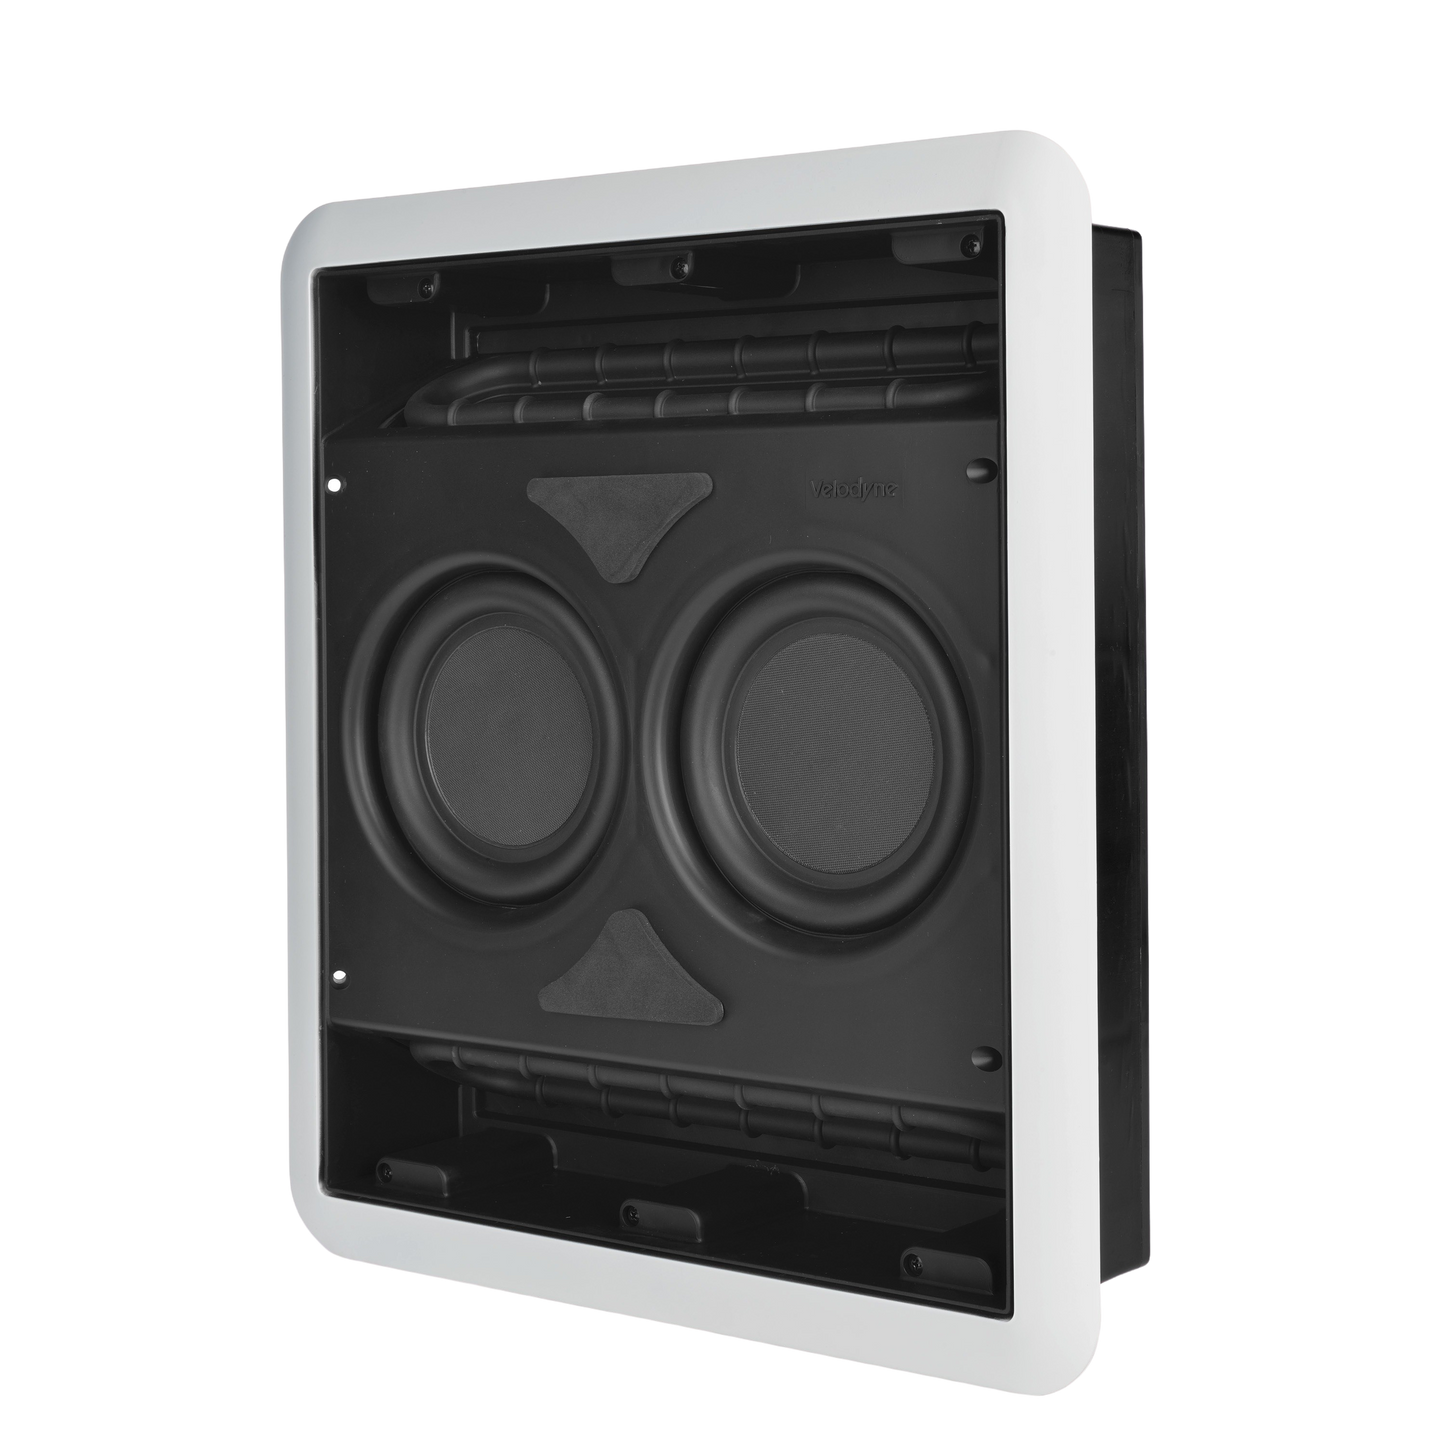 SC 600-IW InWall Passive Subwoofer  Two 6" Active Drivers  Two 3" x 12.5" Passive Radiators  34 to 180 Hz � 3 dB Frequency Response  < 5% THD  1.8kg Magnets (Each), Four Layer Voice Coils  42.5 x 37 x 9.9cm (H x W x D) Cutout Dimensions